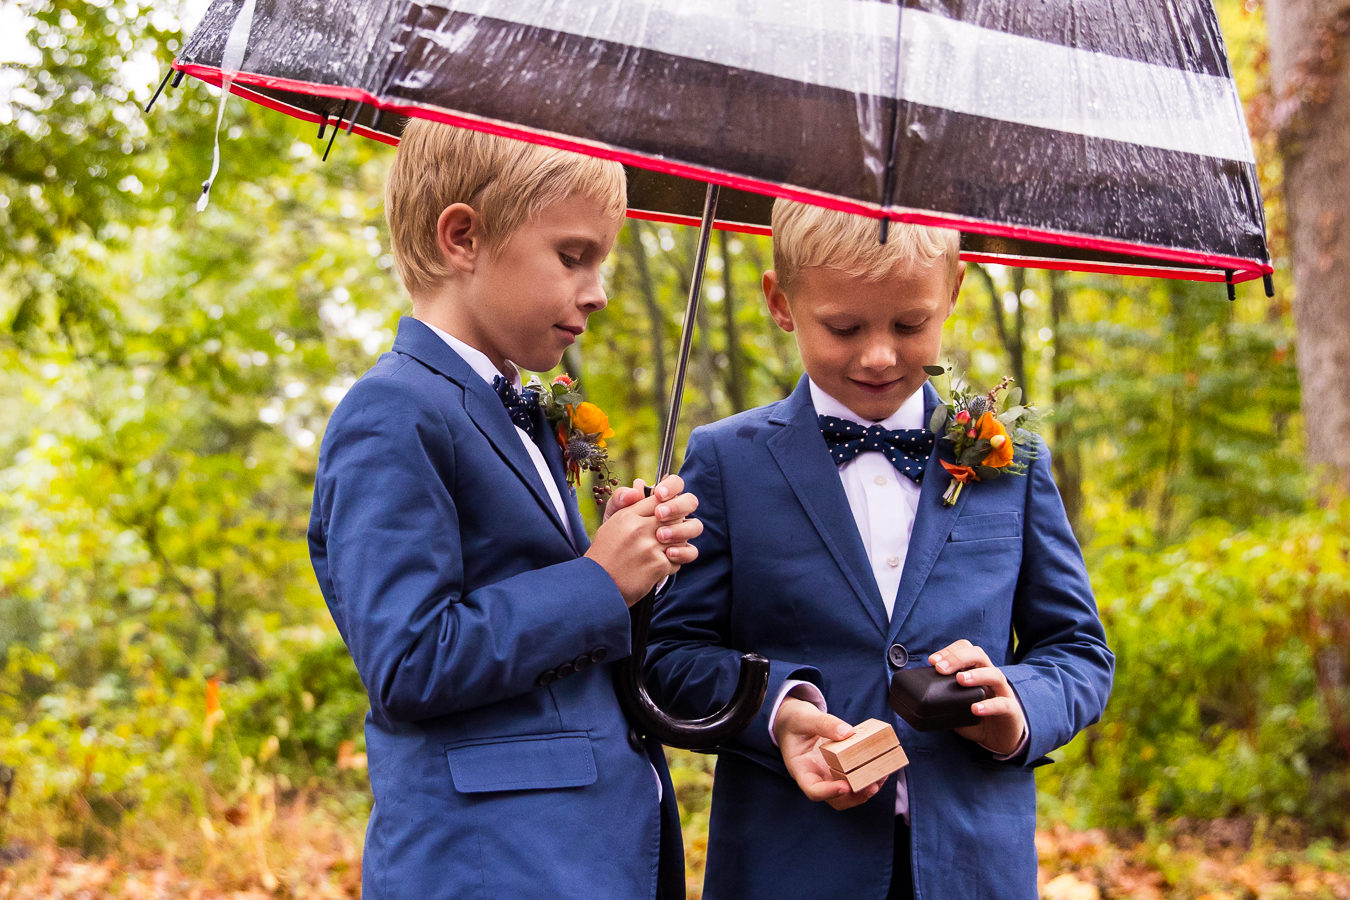 candid moment between the ring bears as they stand under the umbrellas and look at the rings before this Elizabeth Furnace Wedding ceremony in lititz pa